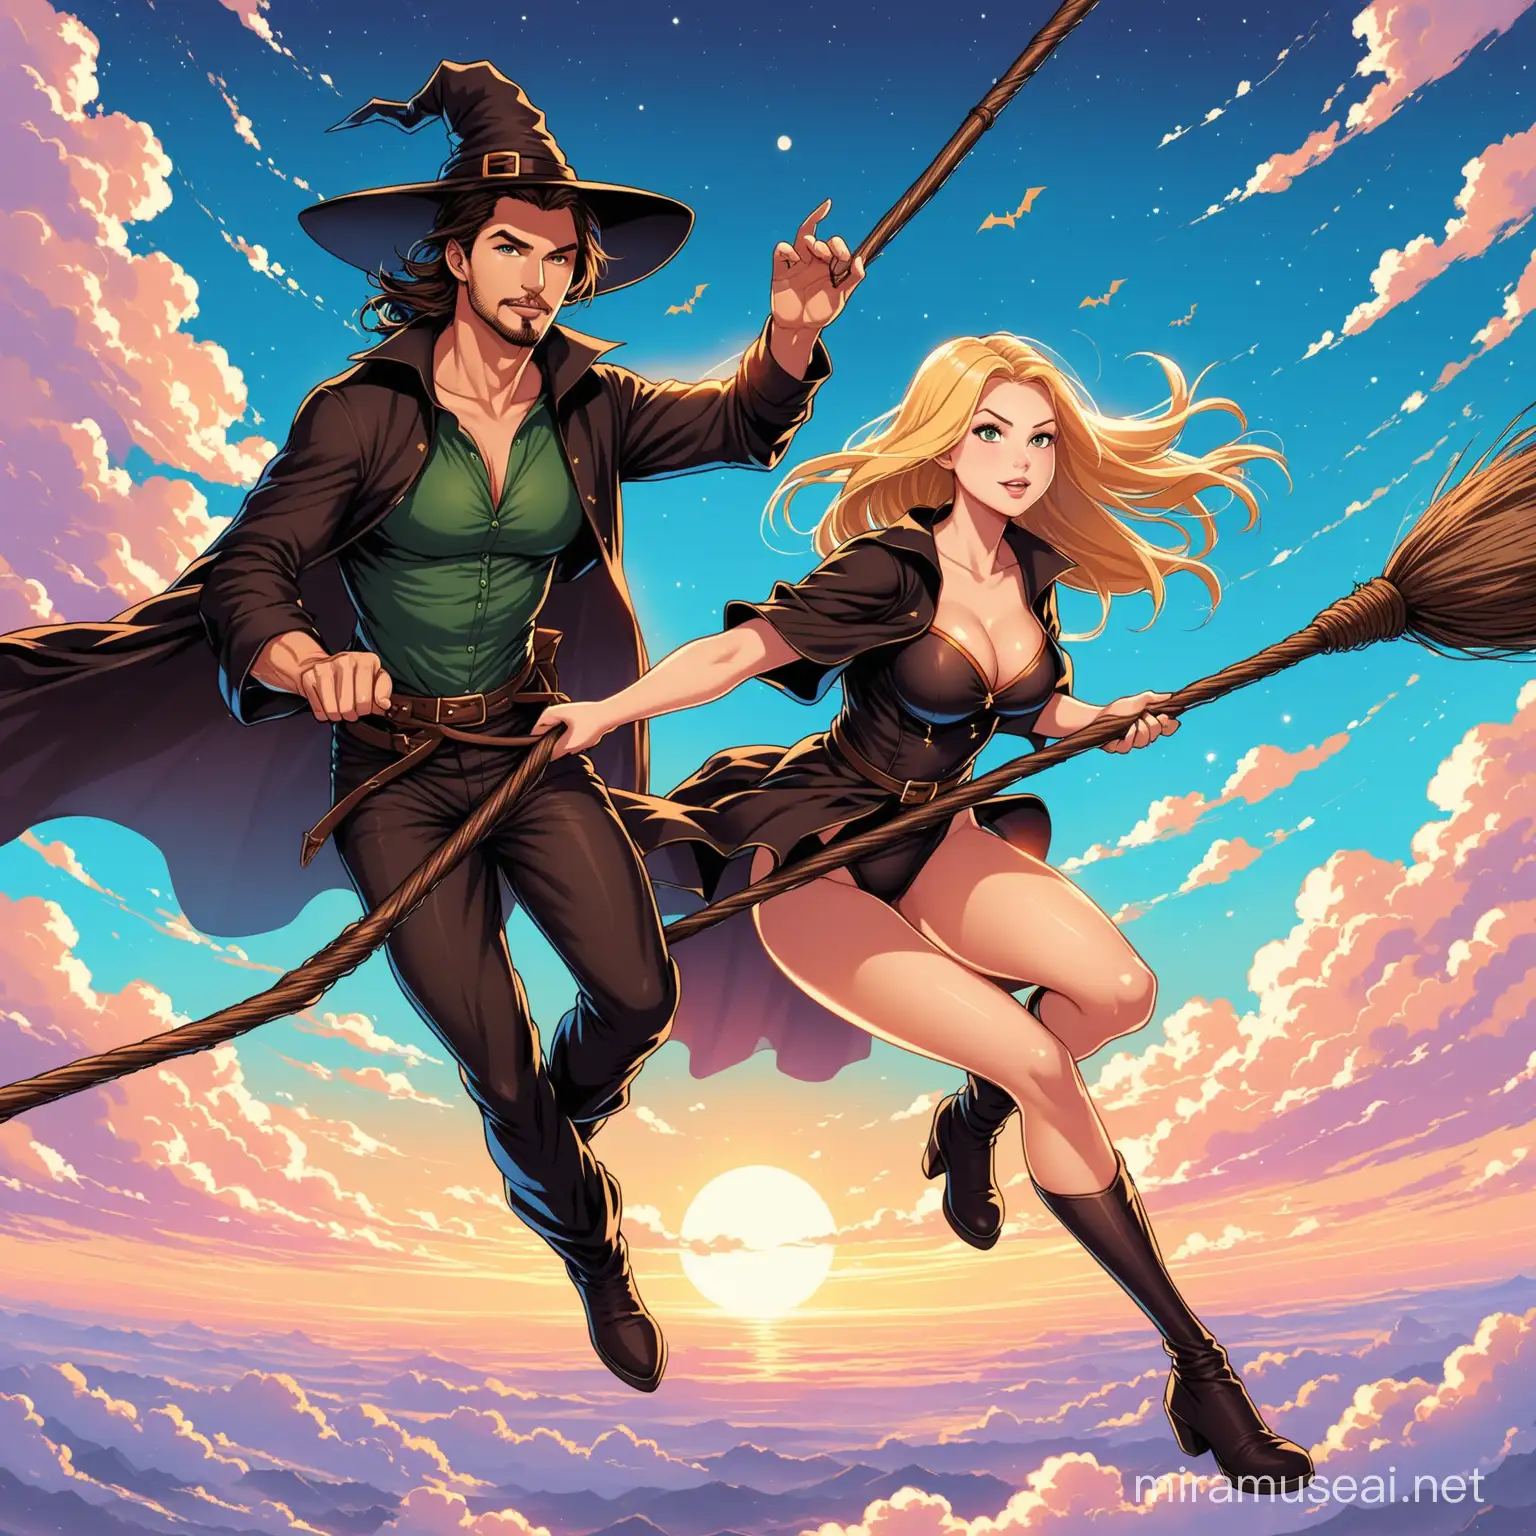 Enchanting Witch and Handsome Companion Soar on Broomsticks